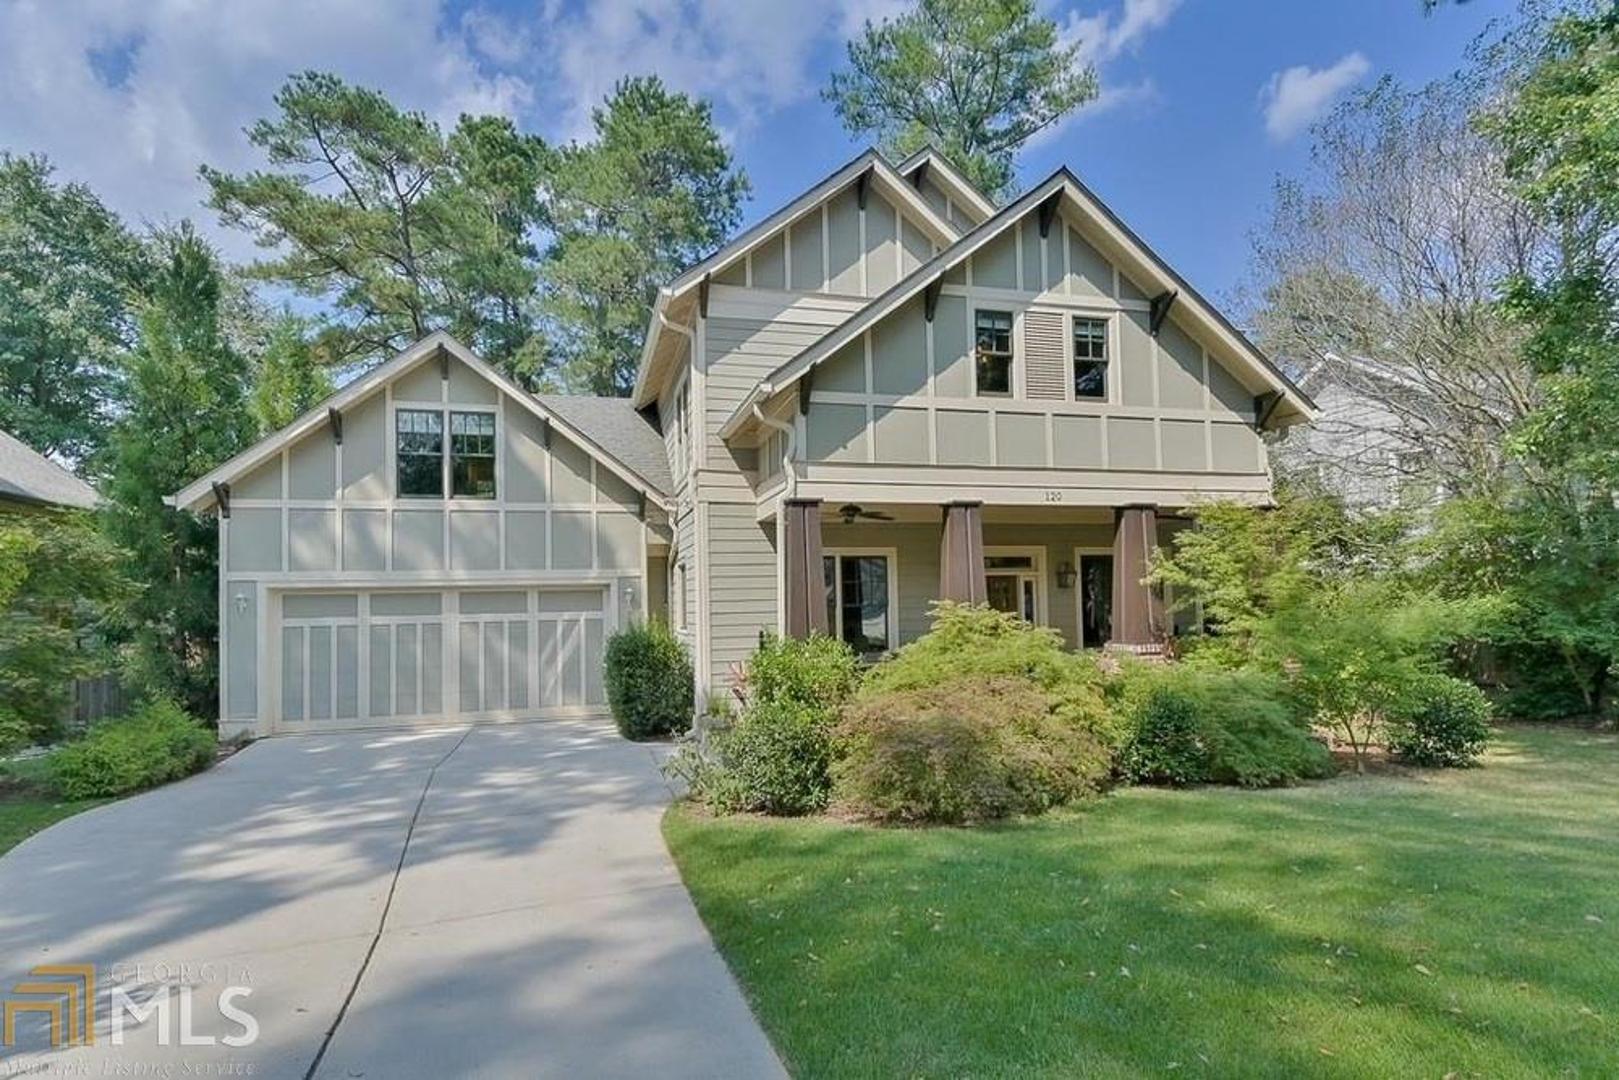 Welcome home to this elegant Craftsman style, custom built home in the top rated Decatur City Schools district.